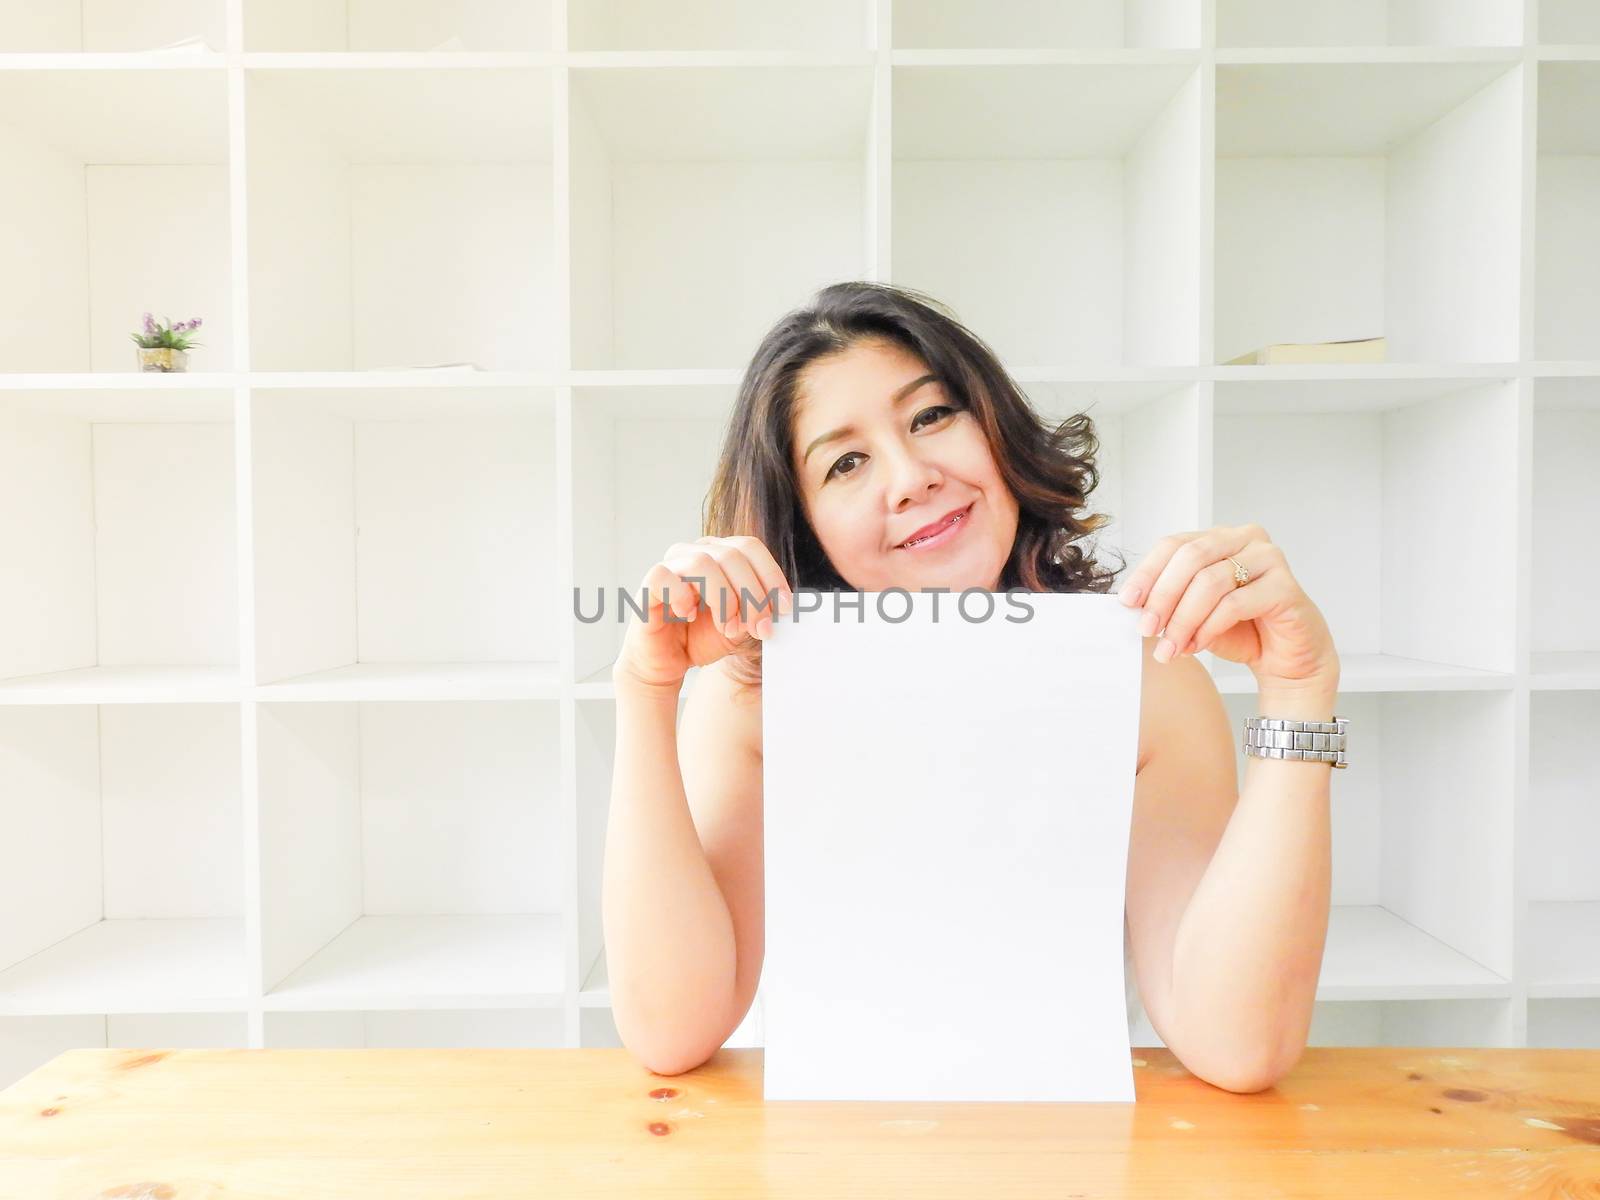 Beautiful woman smiling happy against white background.
